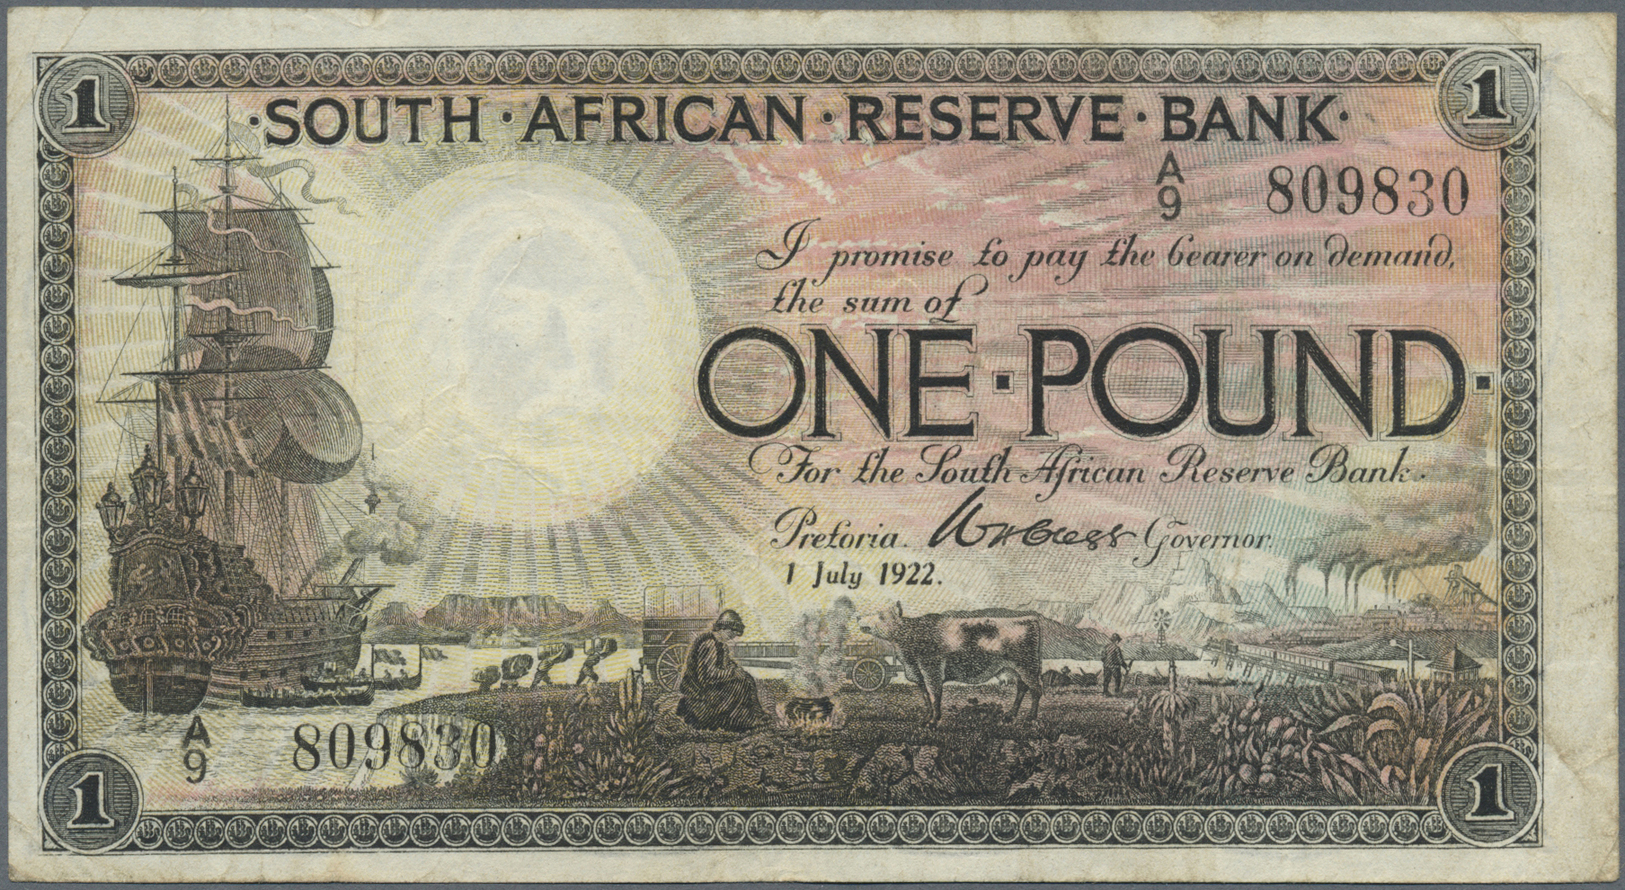 02944 South Africa / Südafrika: 1 Pound 1922 P. 75, Used With Folds, Creases And Stain In Paper, No Holes Or Tears, Cond - Afrique Du Sud